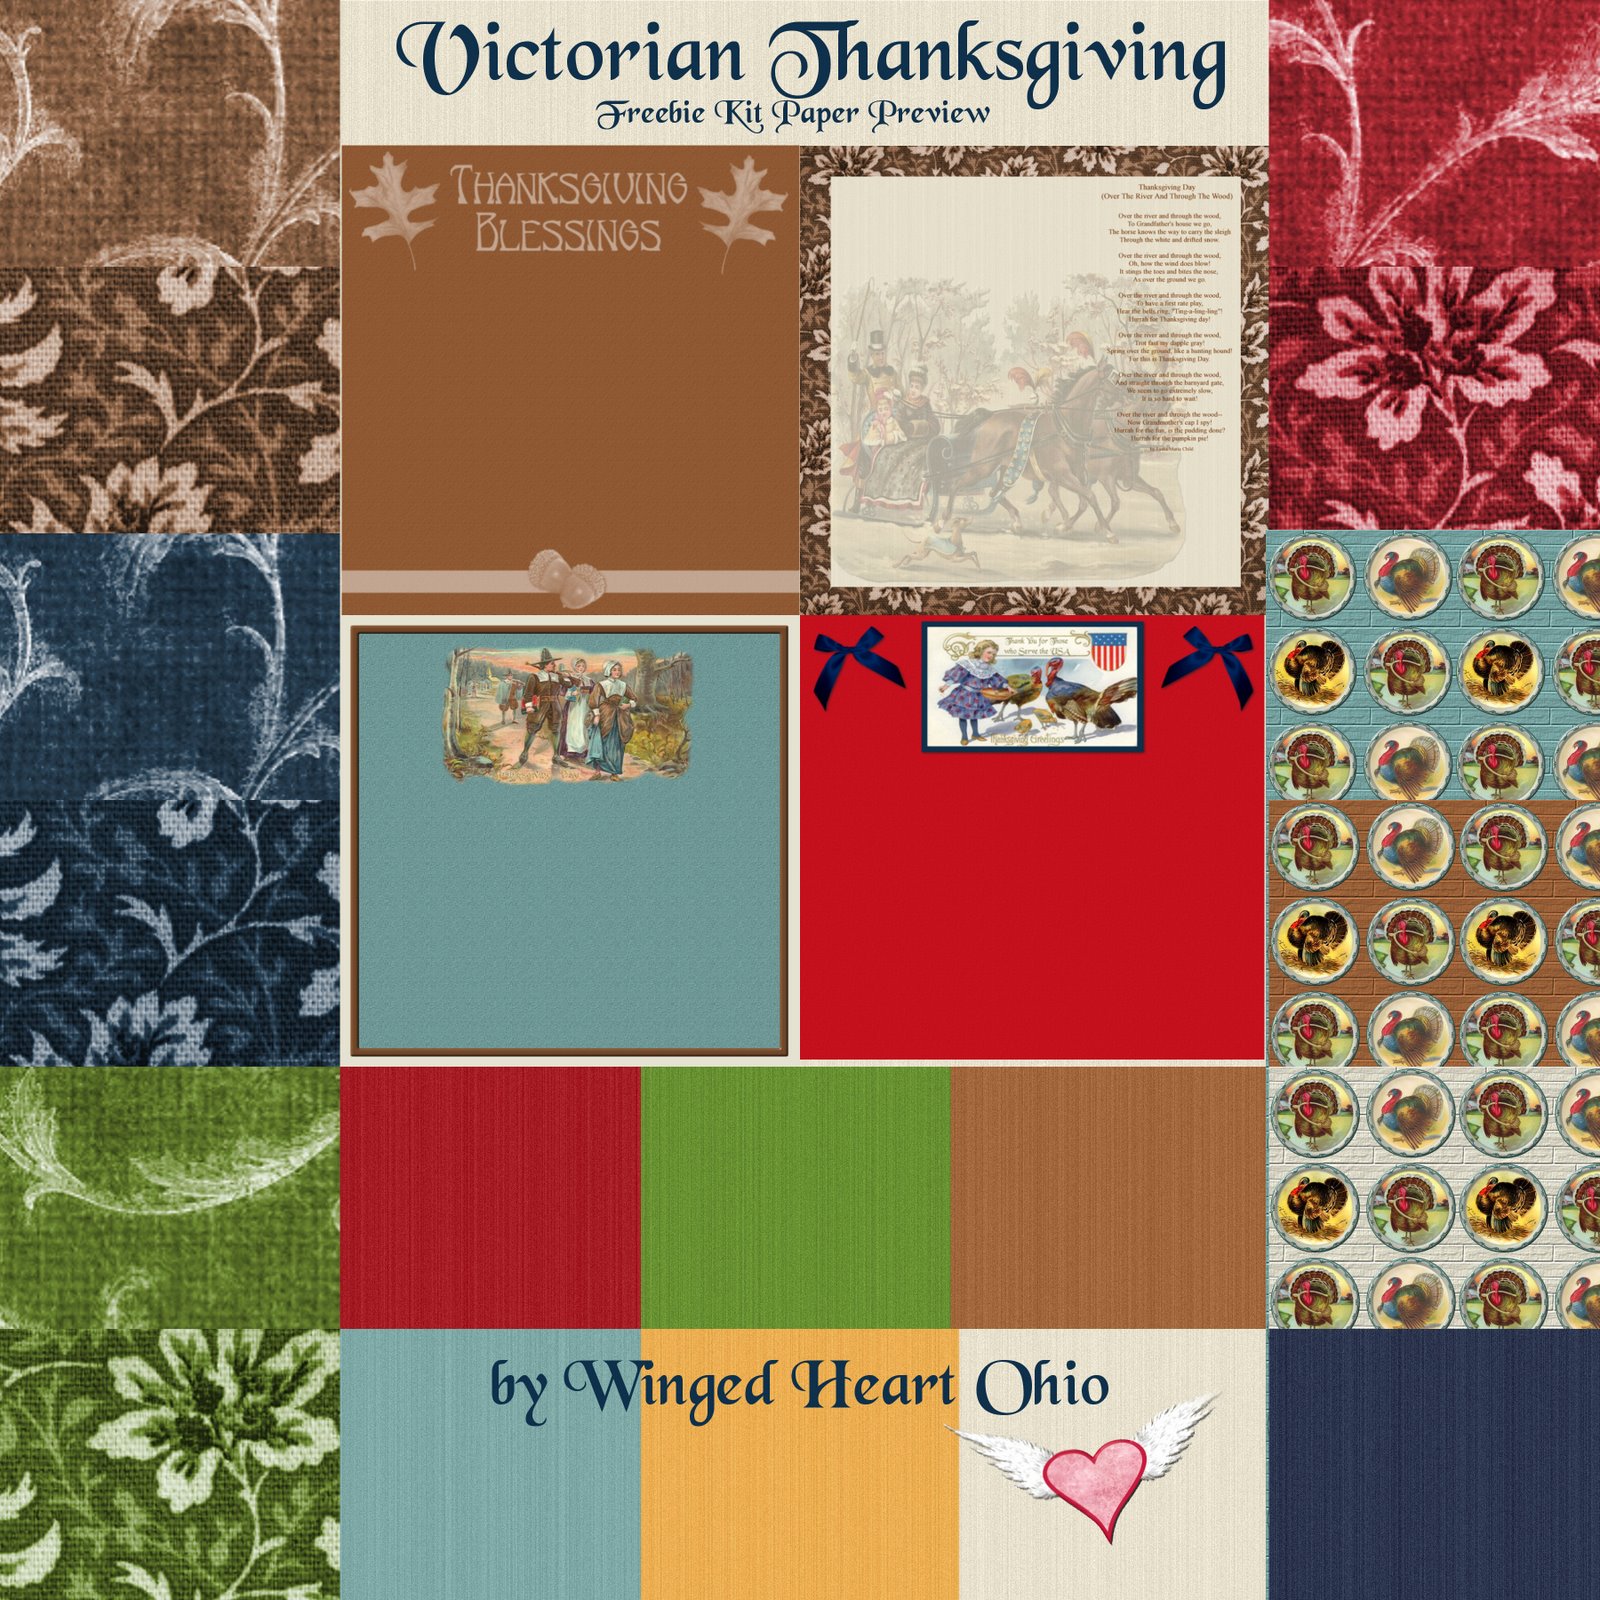 [WH_VictorianThanksgiving_paper+preview.jpg]